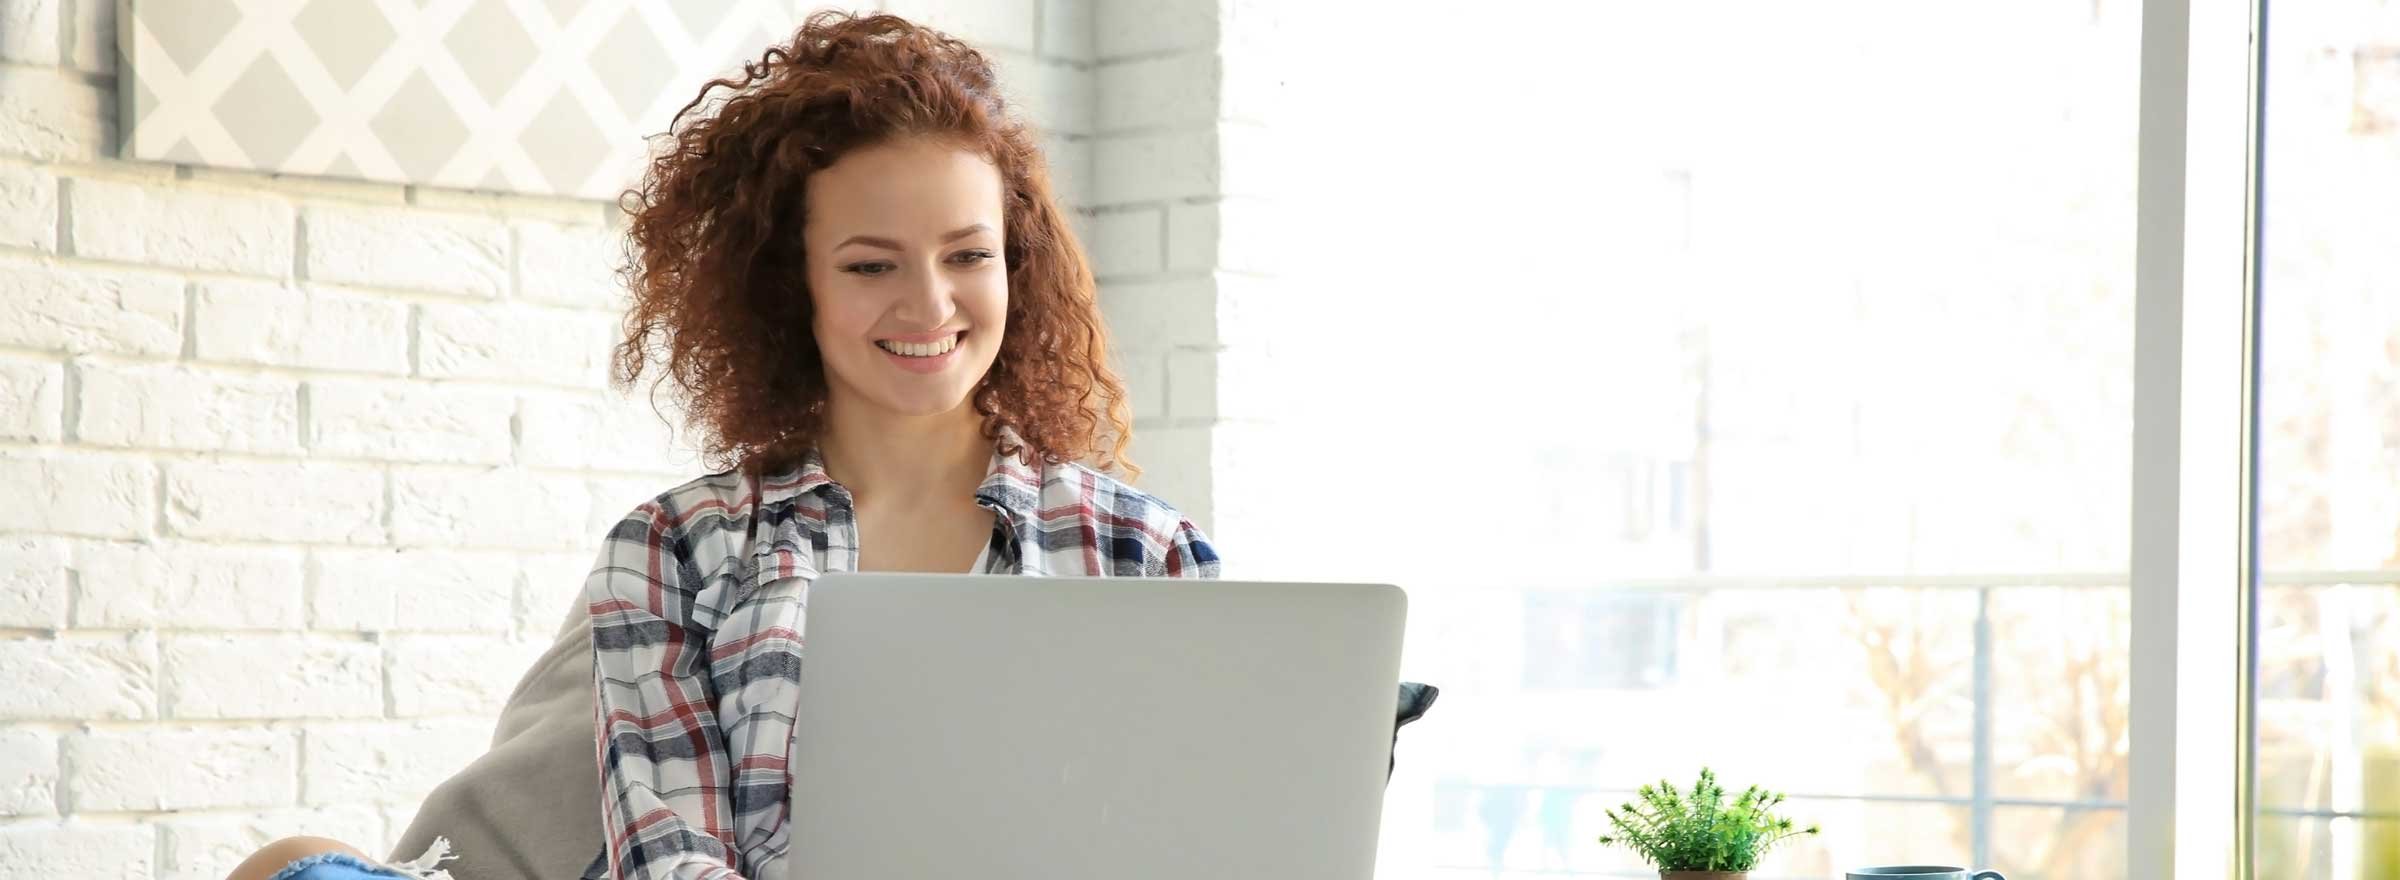 woman smiling at a laptop